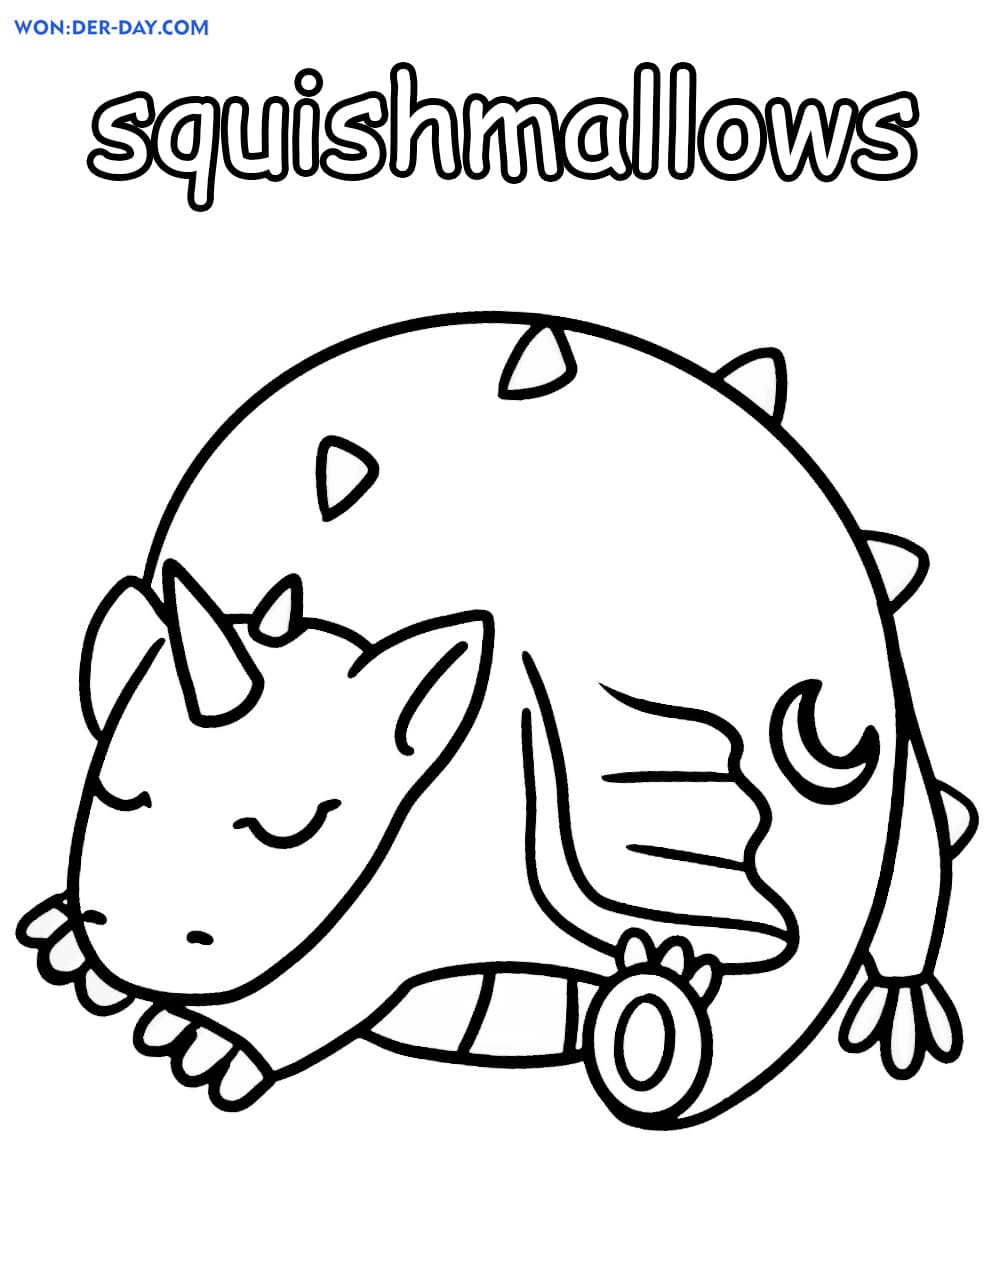 Squishmallows Coloring Pages Printable Coloring Pages Free